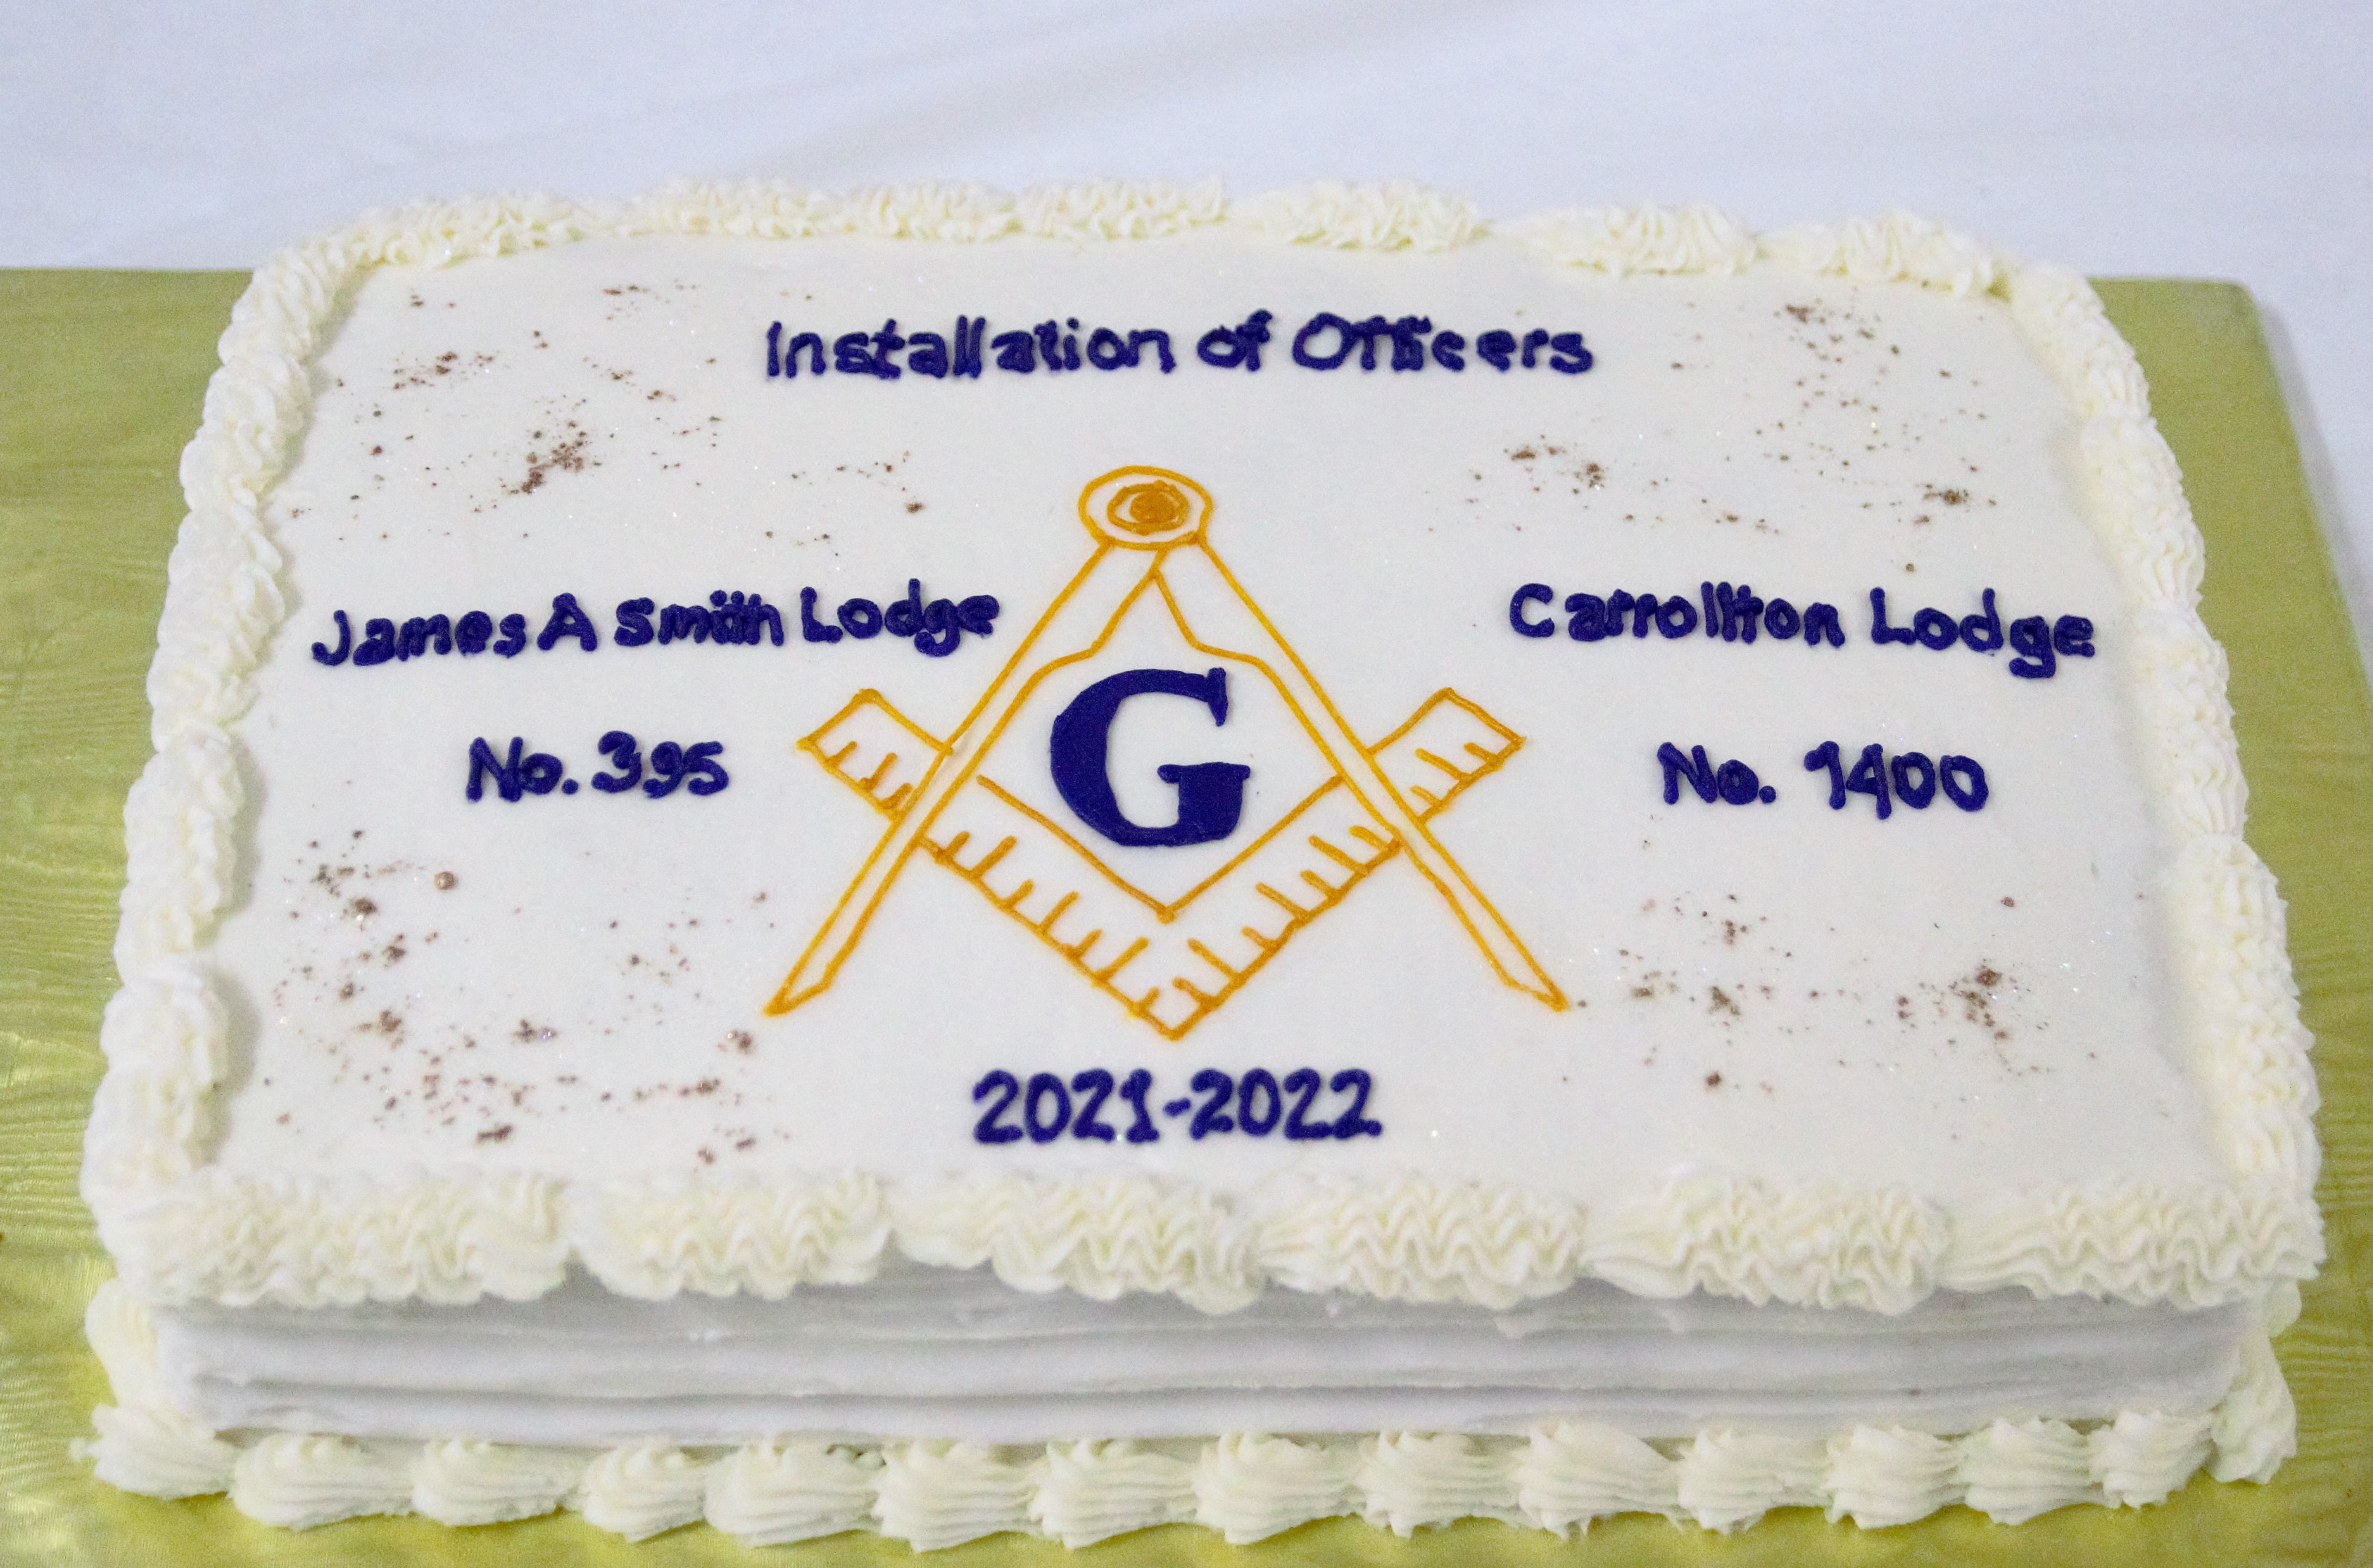 2021 - Carrollton 1400 & James A. Smith 395 Joint Installation of Officers
